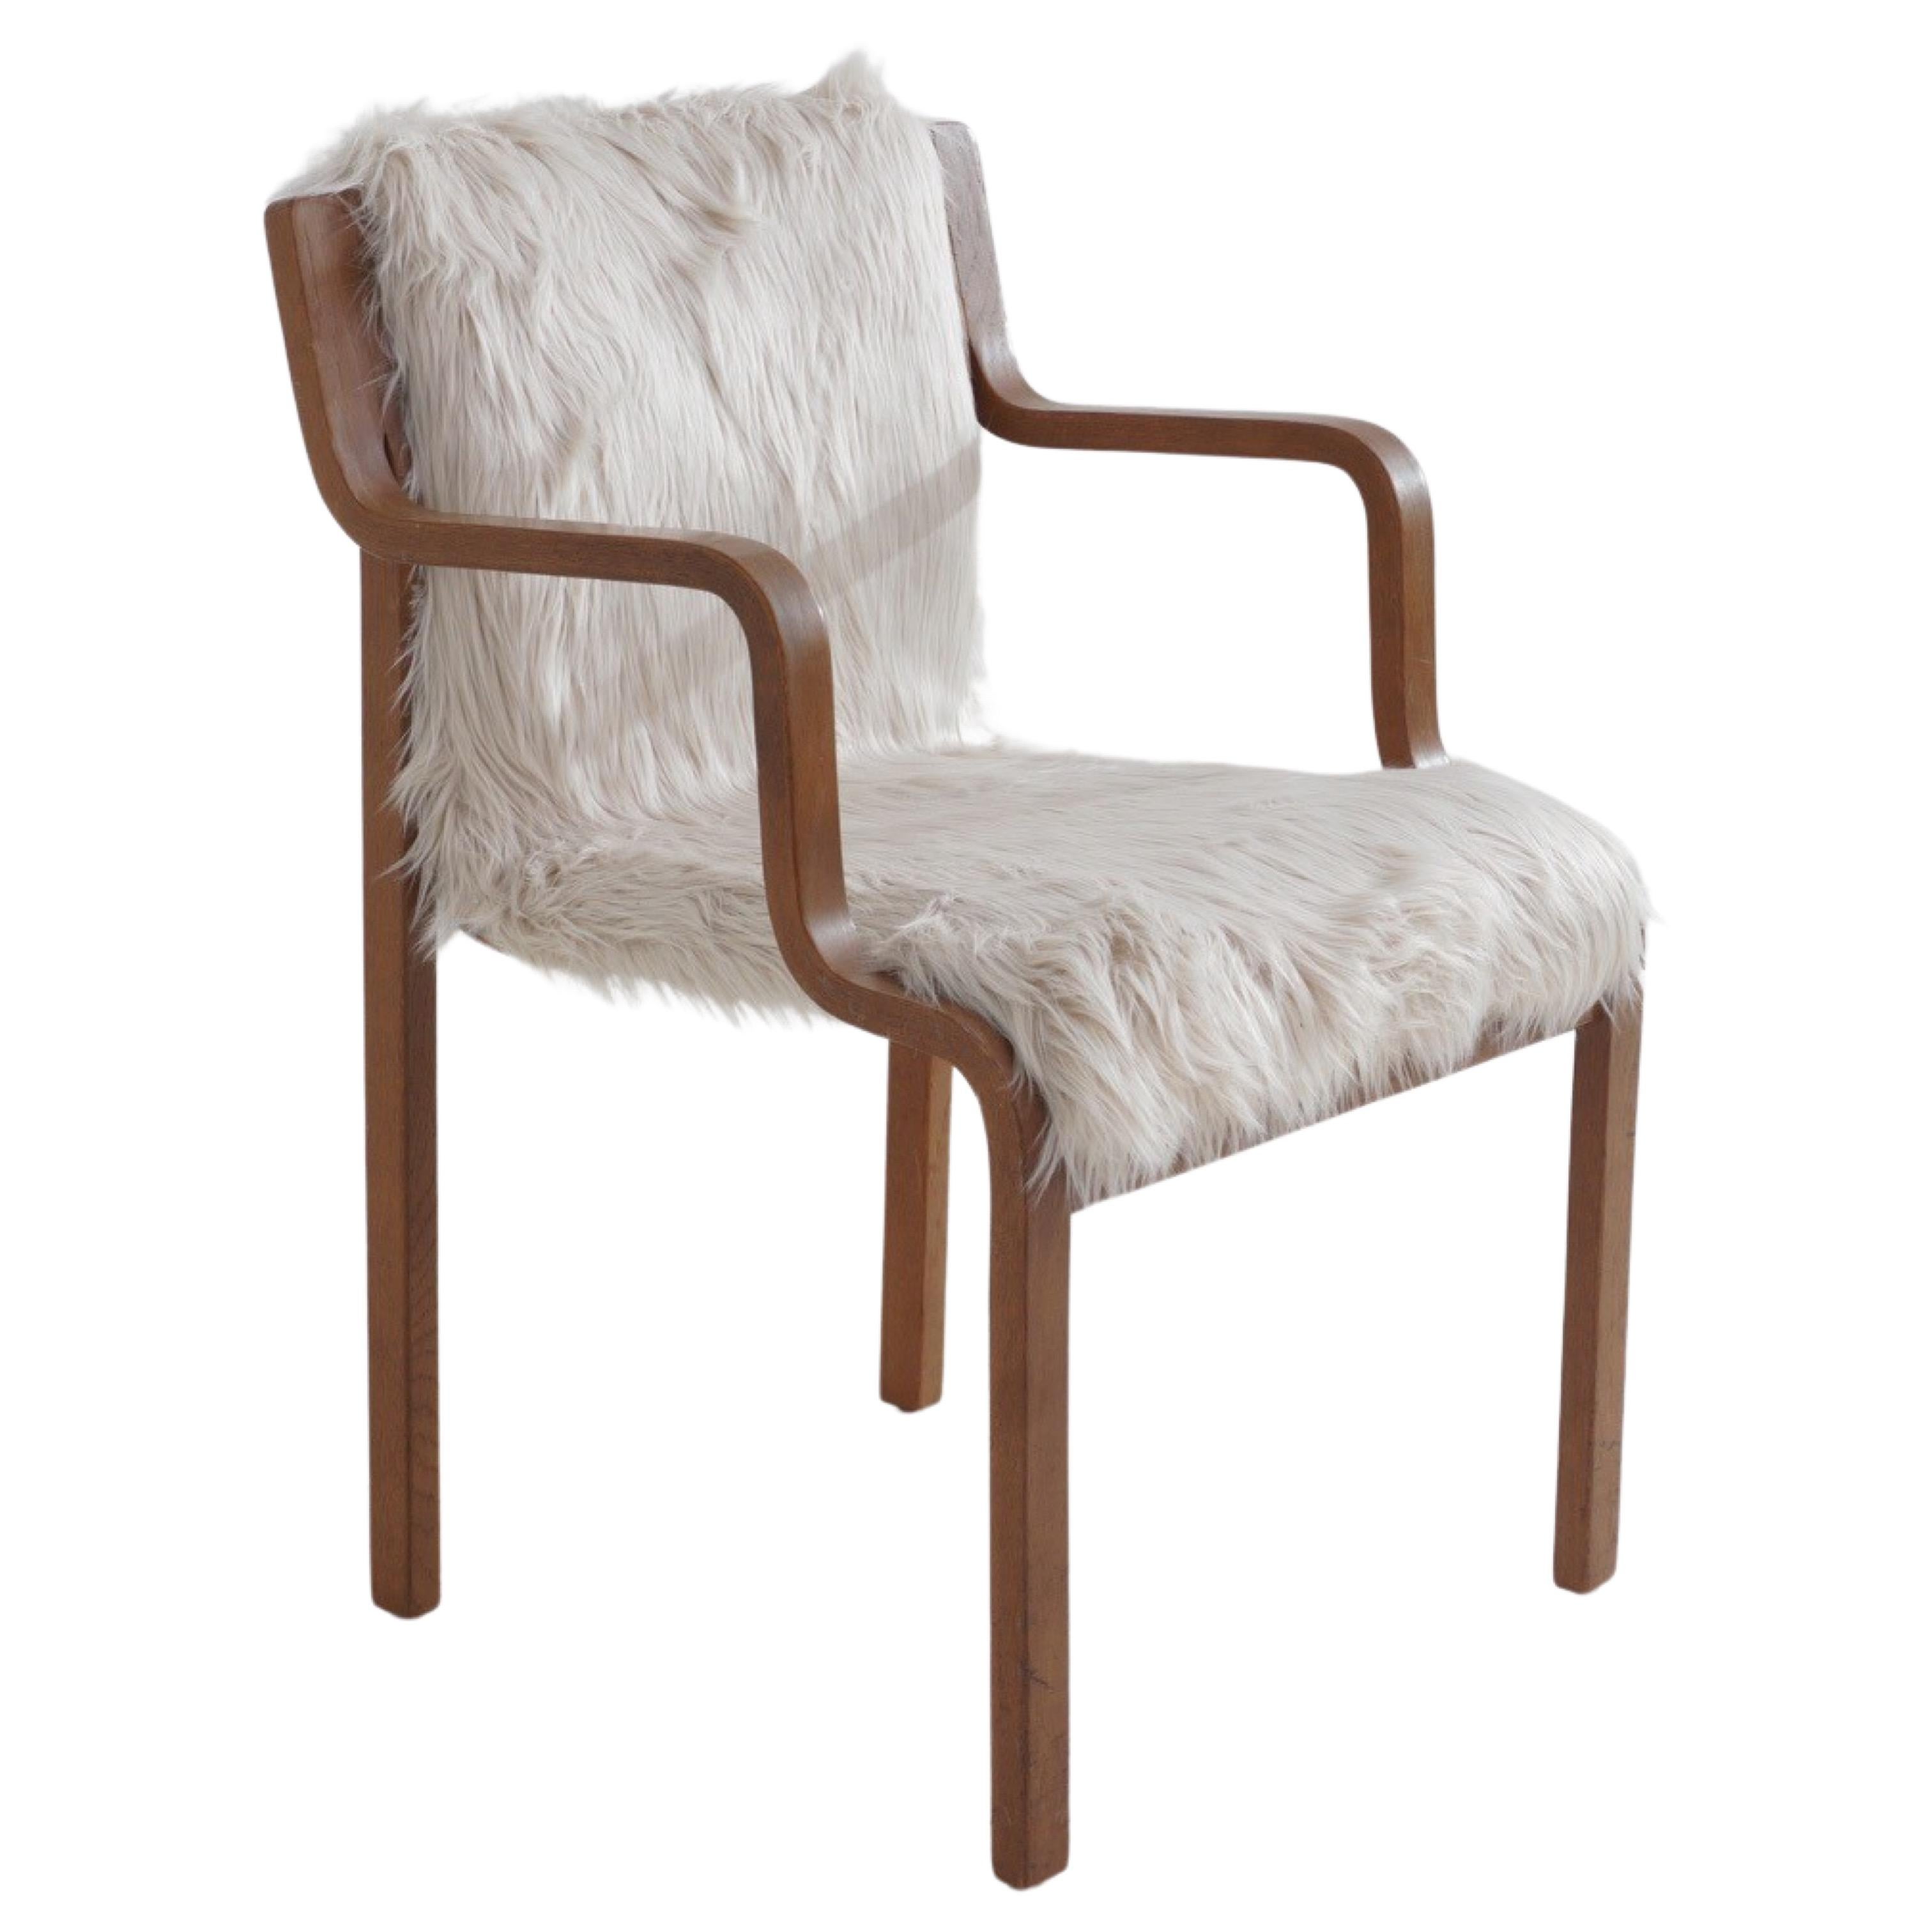 Faux Fur Pair of Swedish Bentwood Chairs by Stendig, 1960s For Sale